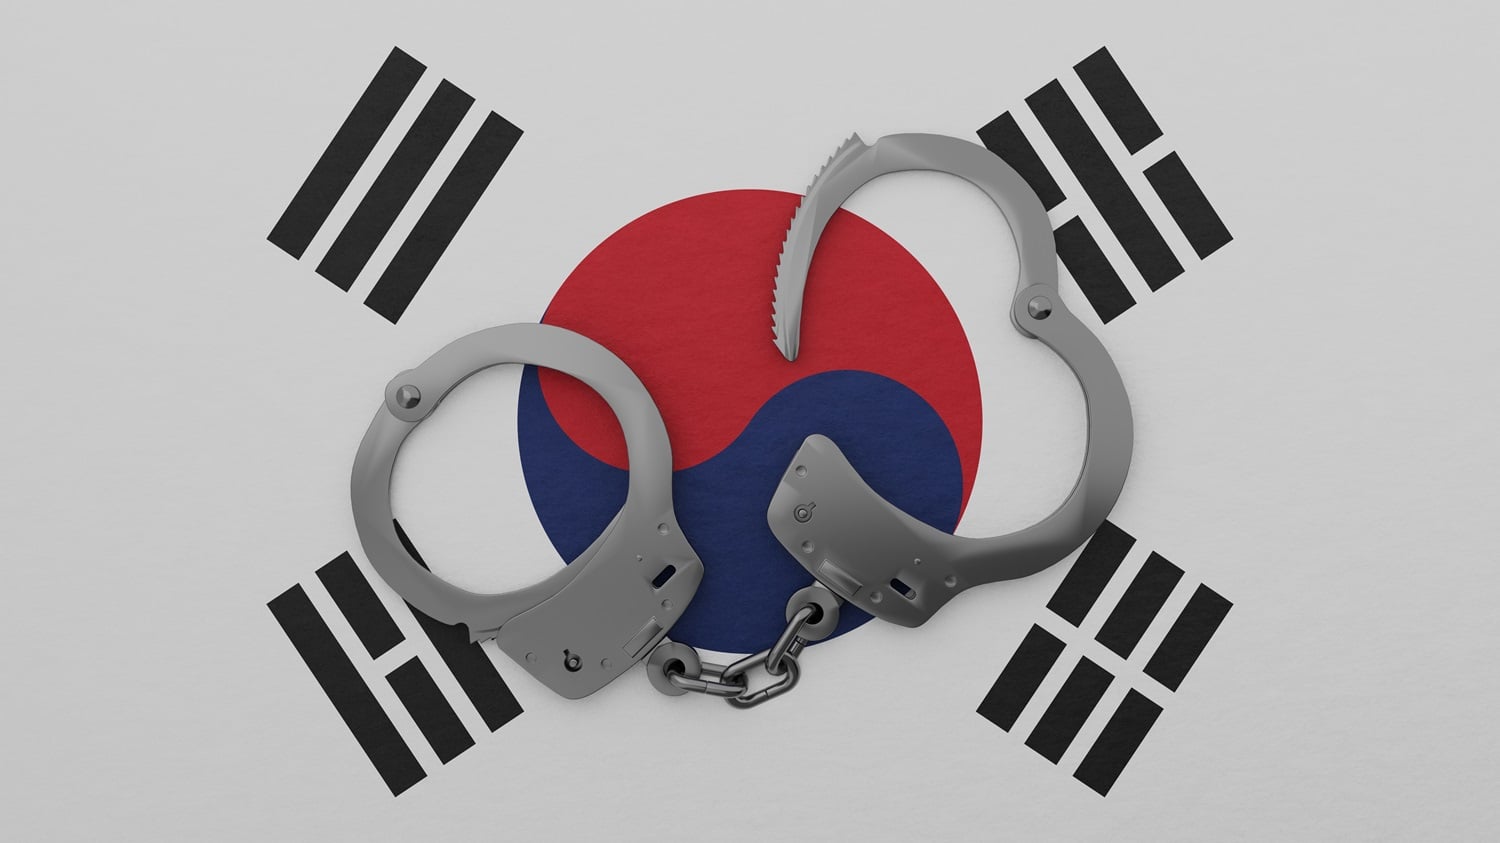 A half-opened set of steel handcuffs against the background of the South Korean flag